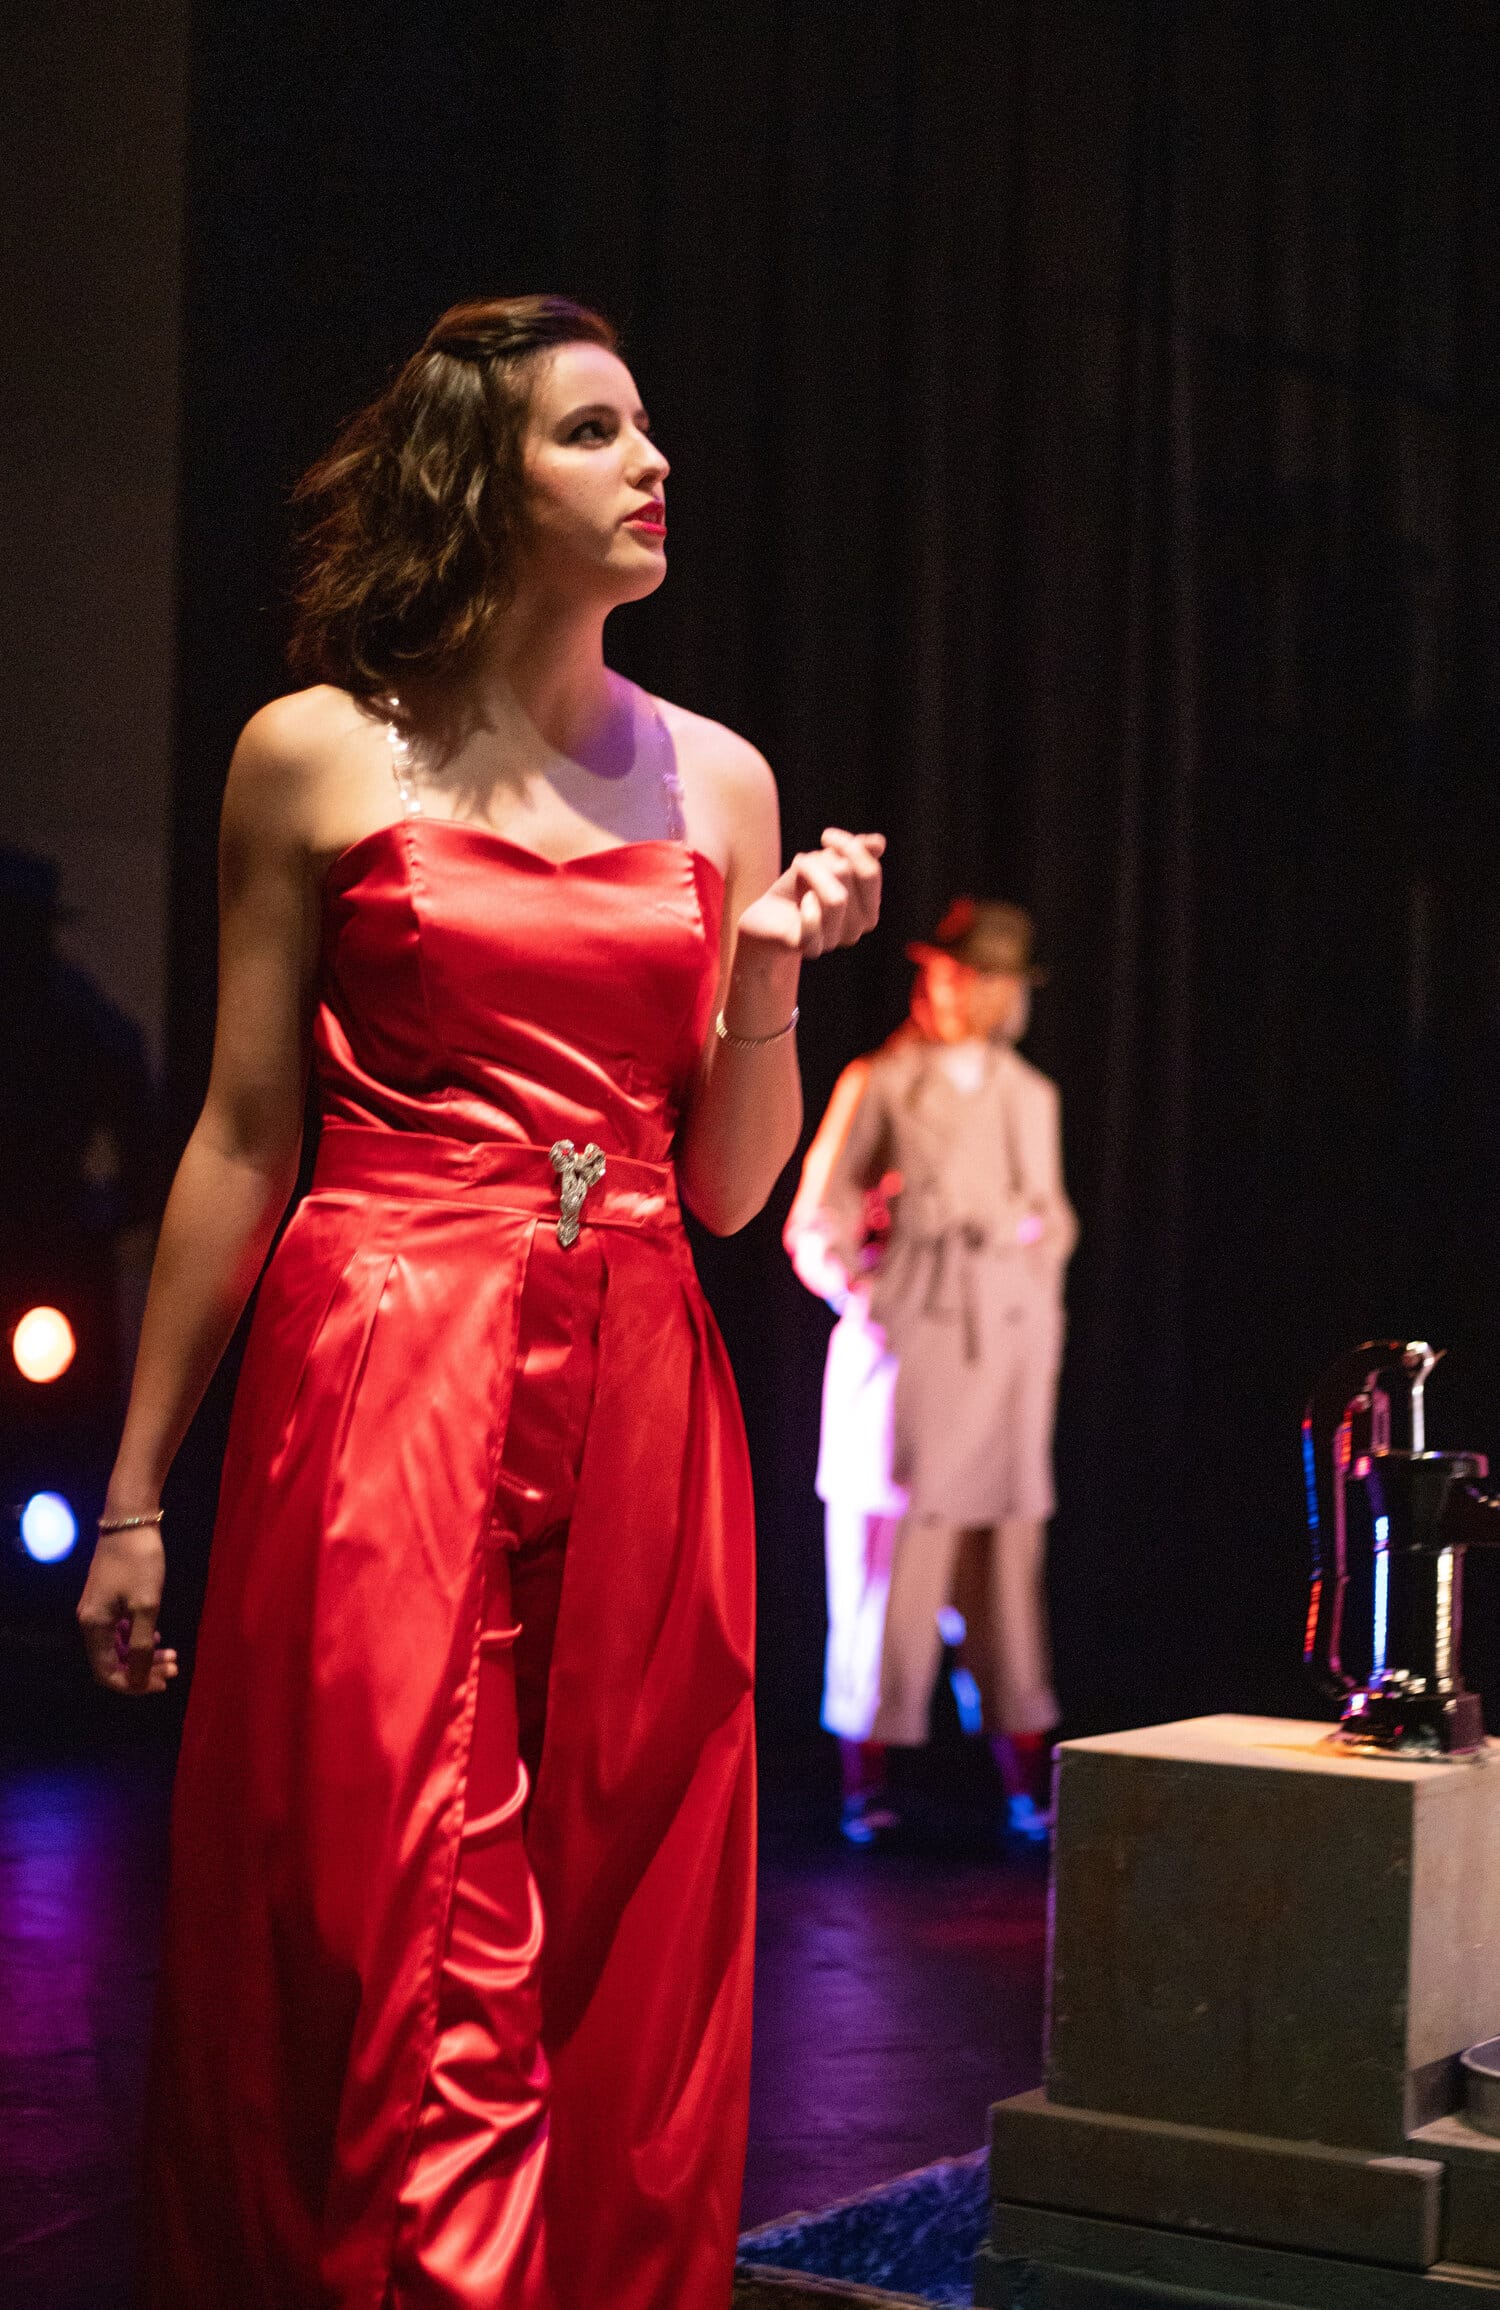 Abigail Dover, playing Lord of the Underworld, walks onto the main stage to talk to Eurydice.